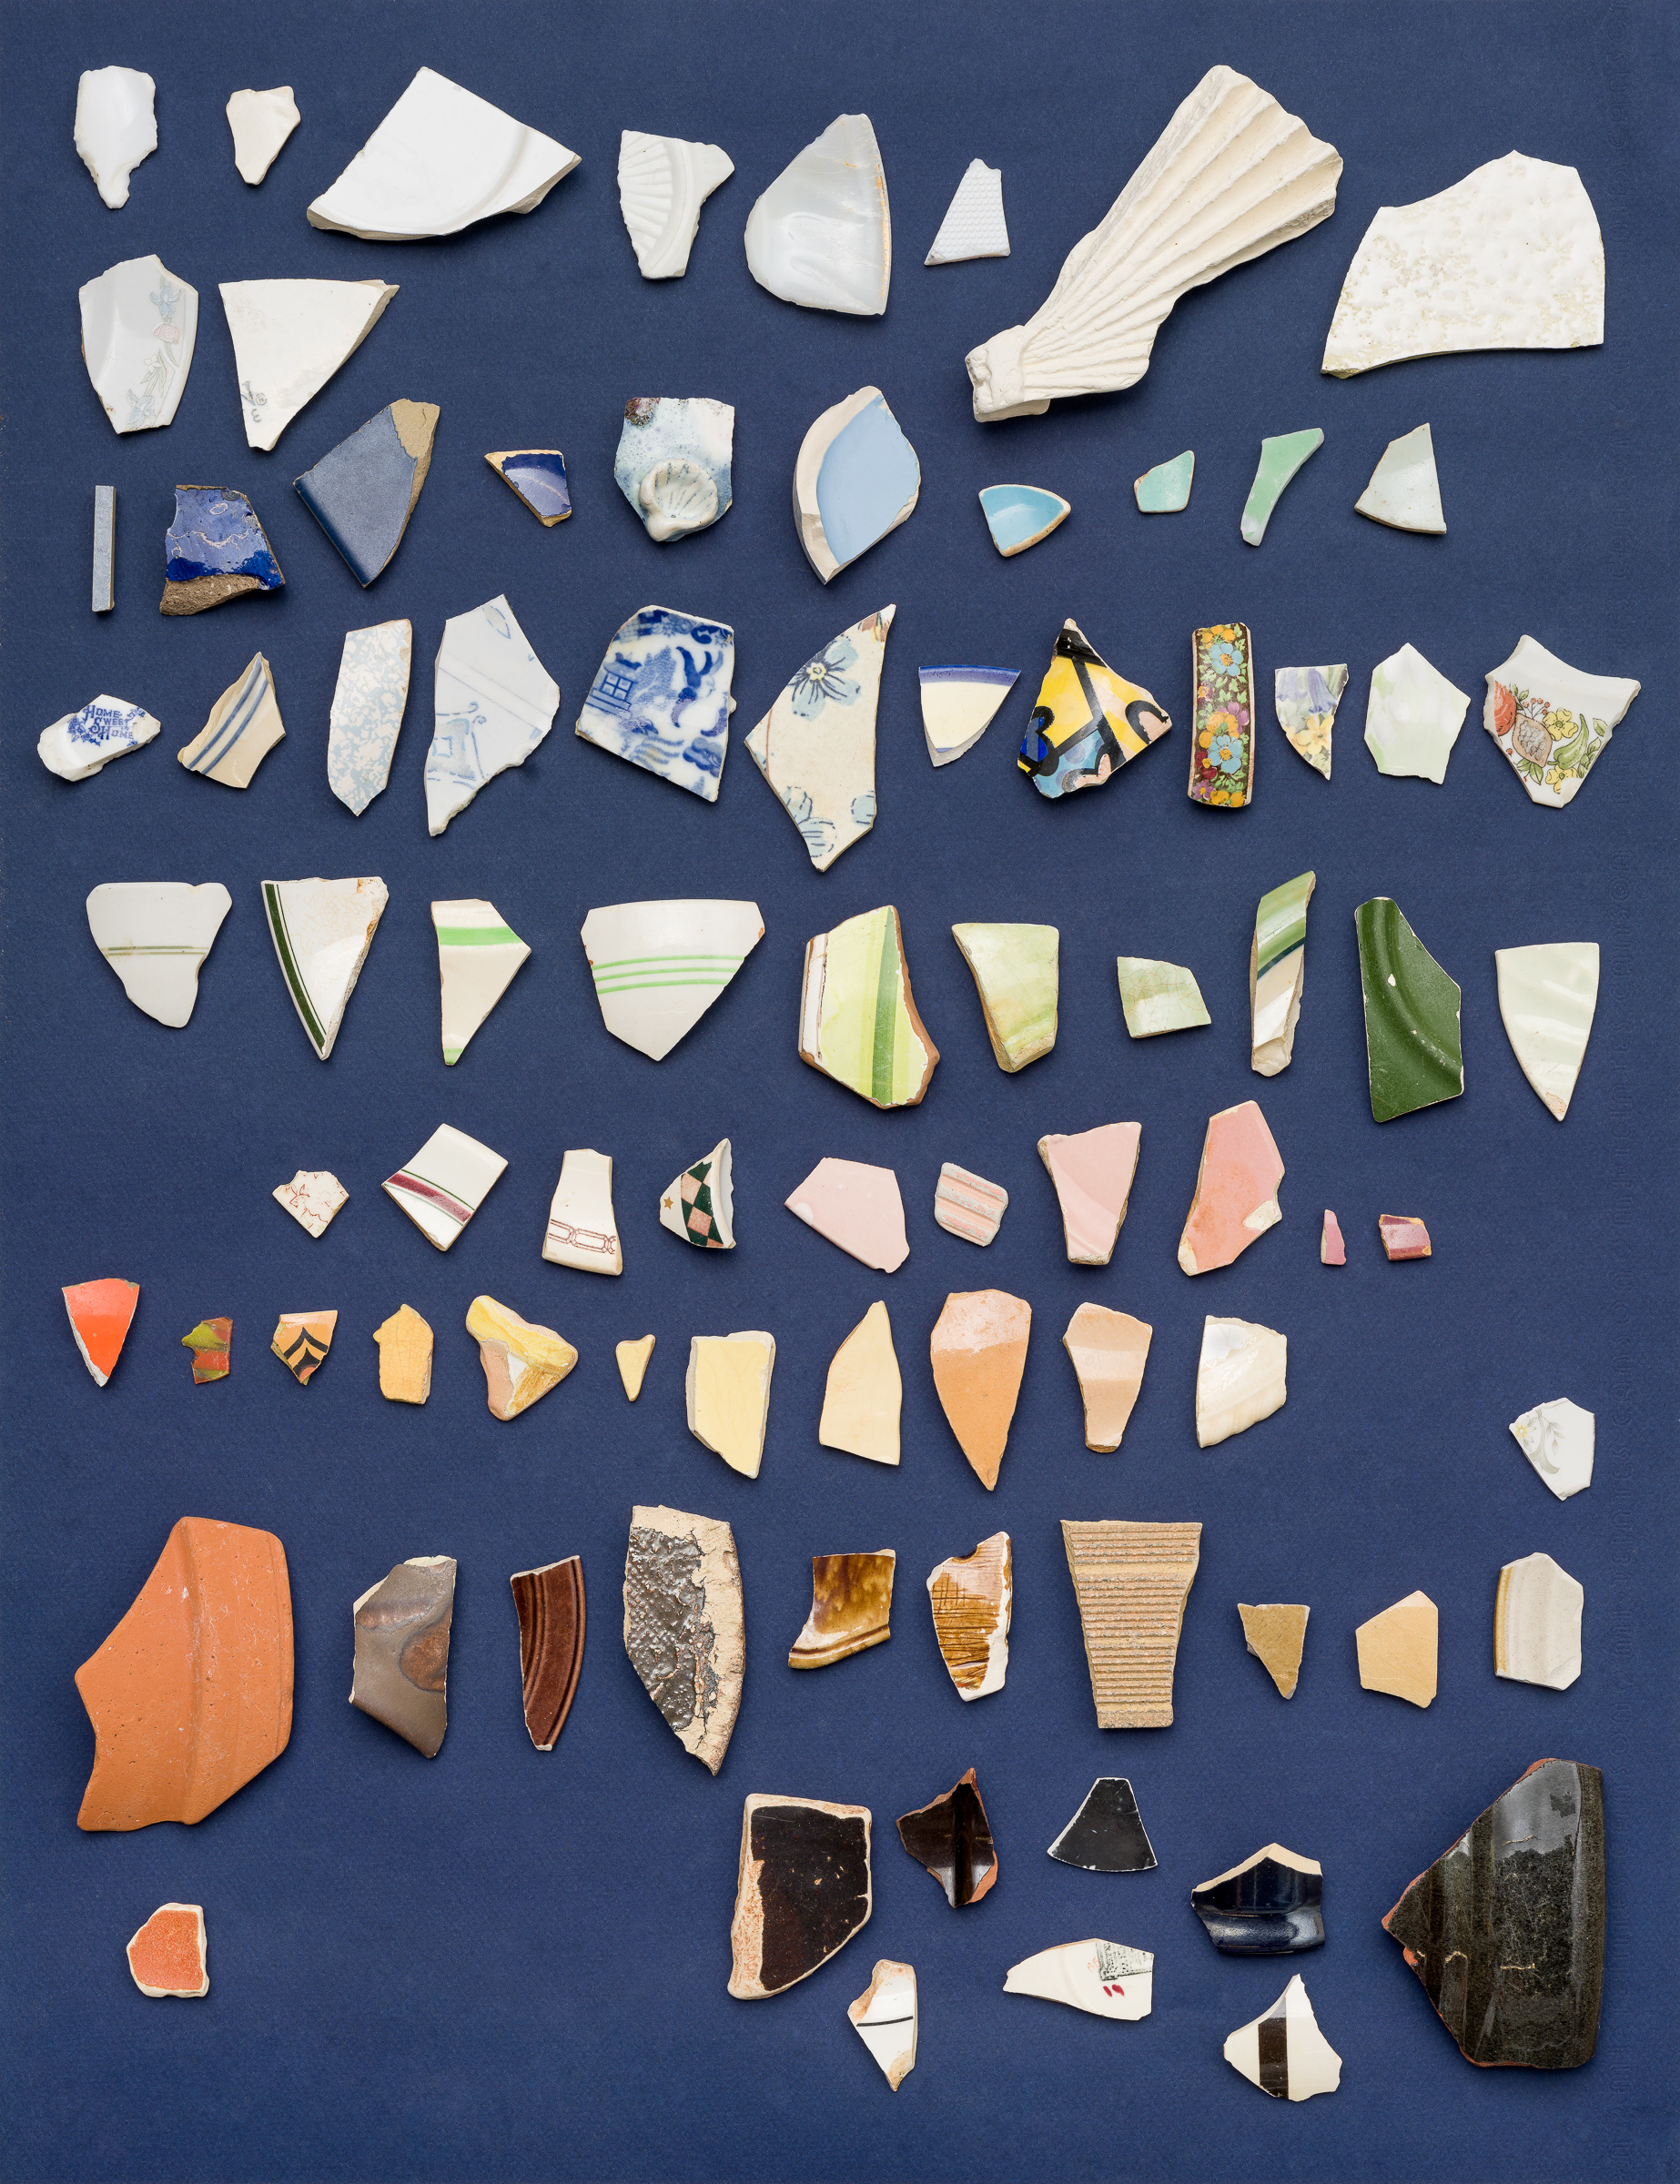 Multicoloured shards of broken pottery arranged in rows agaisnt a navy blue background. 